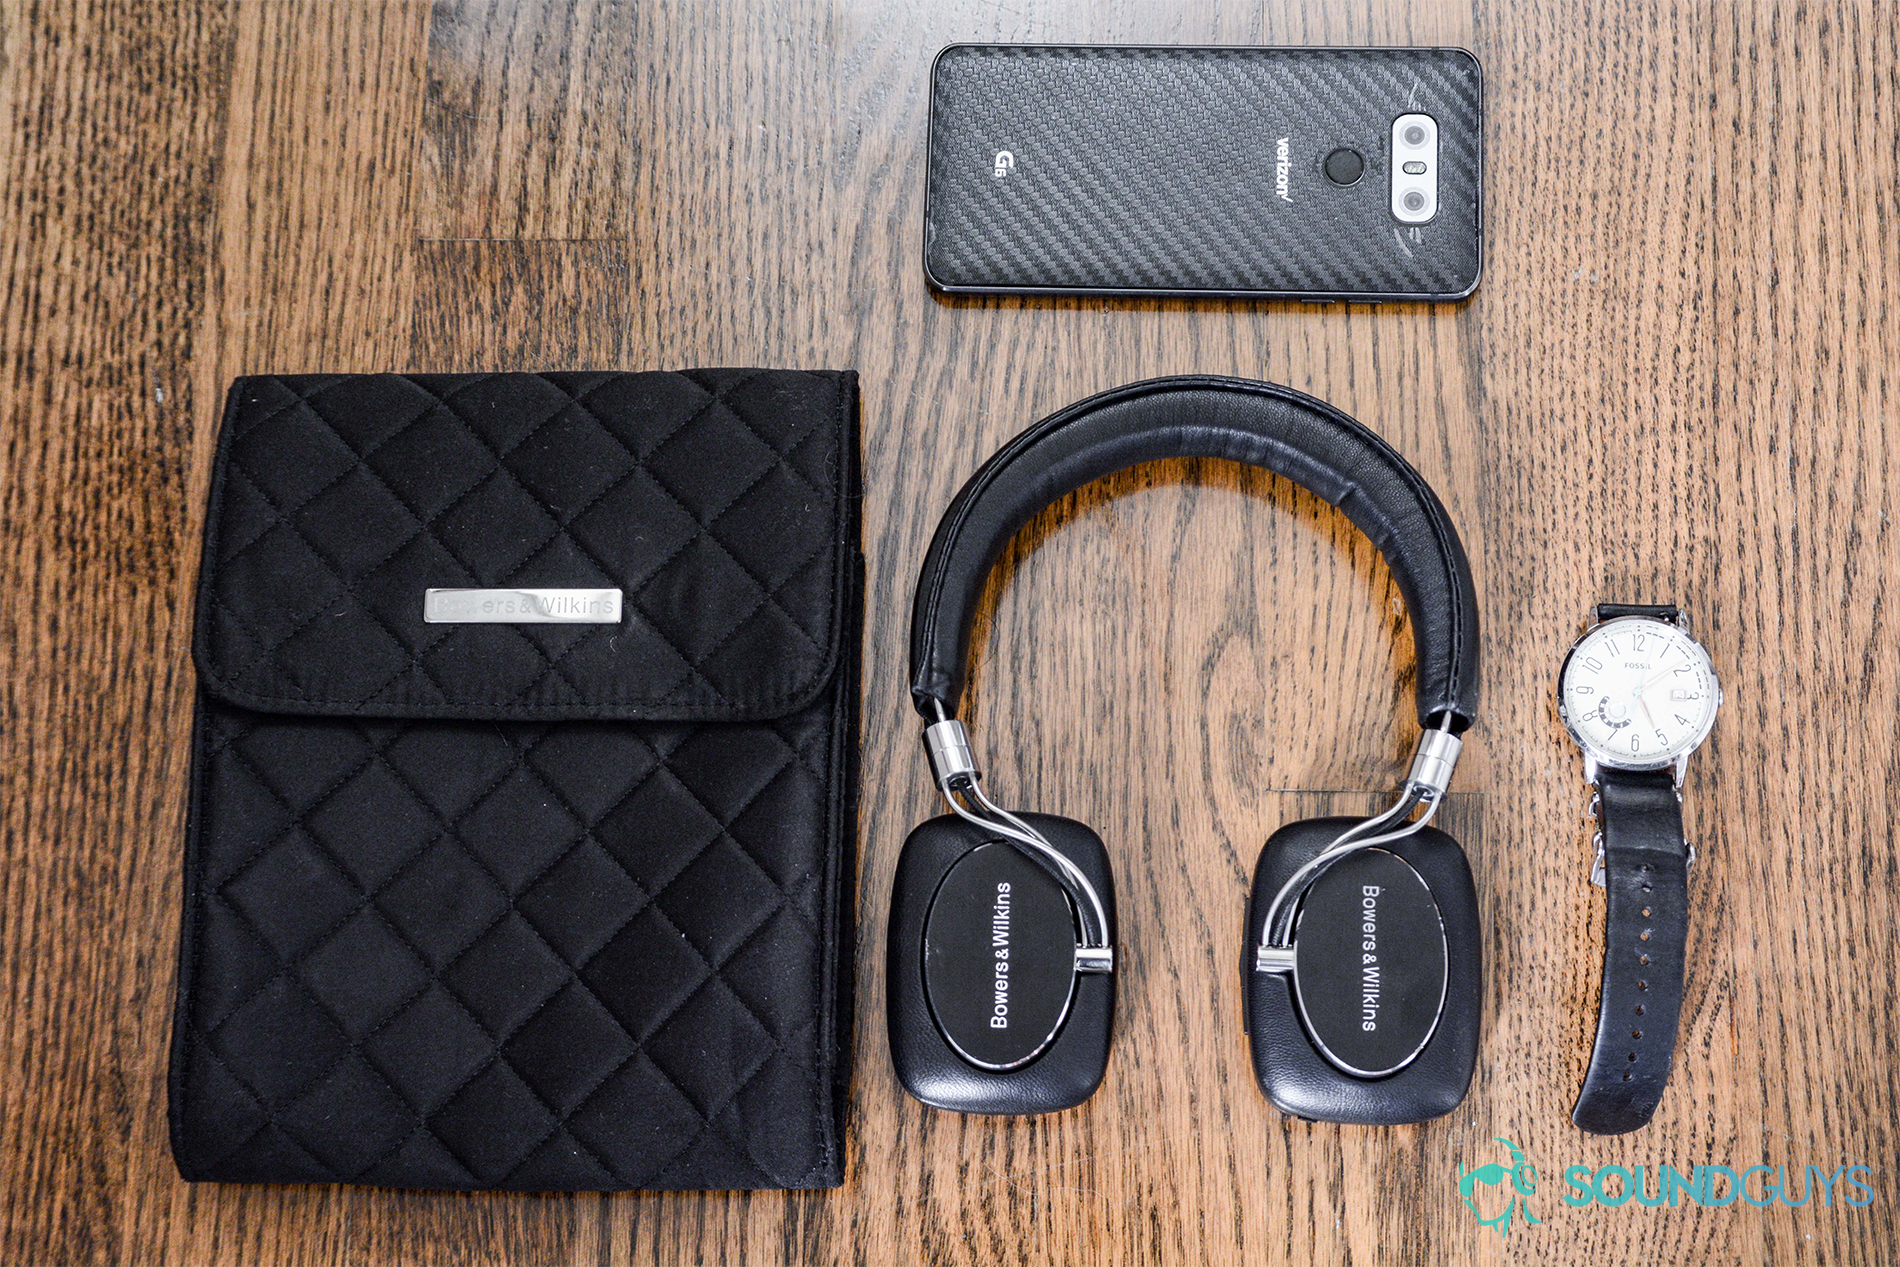 Bowers and Wilkins P5 Wireless: The headphones and quilted pouch on a wooden floor. A black watch and LG G6 appear too.